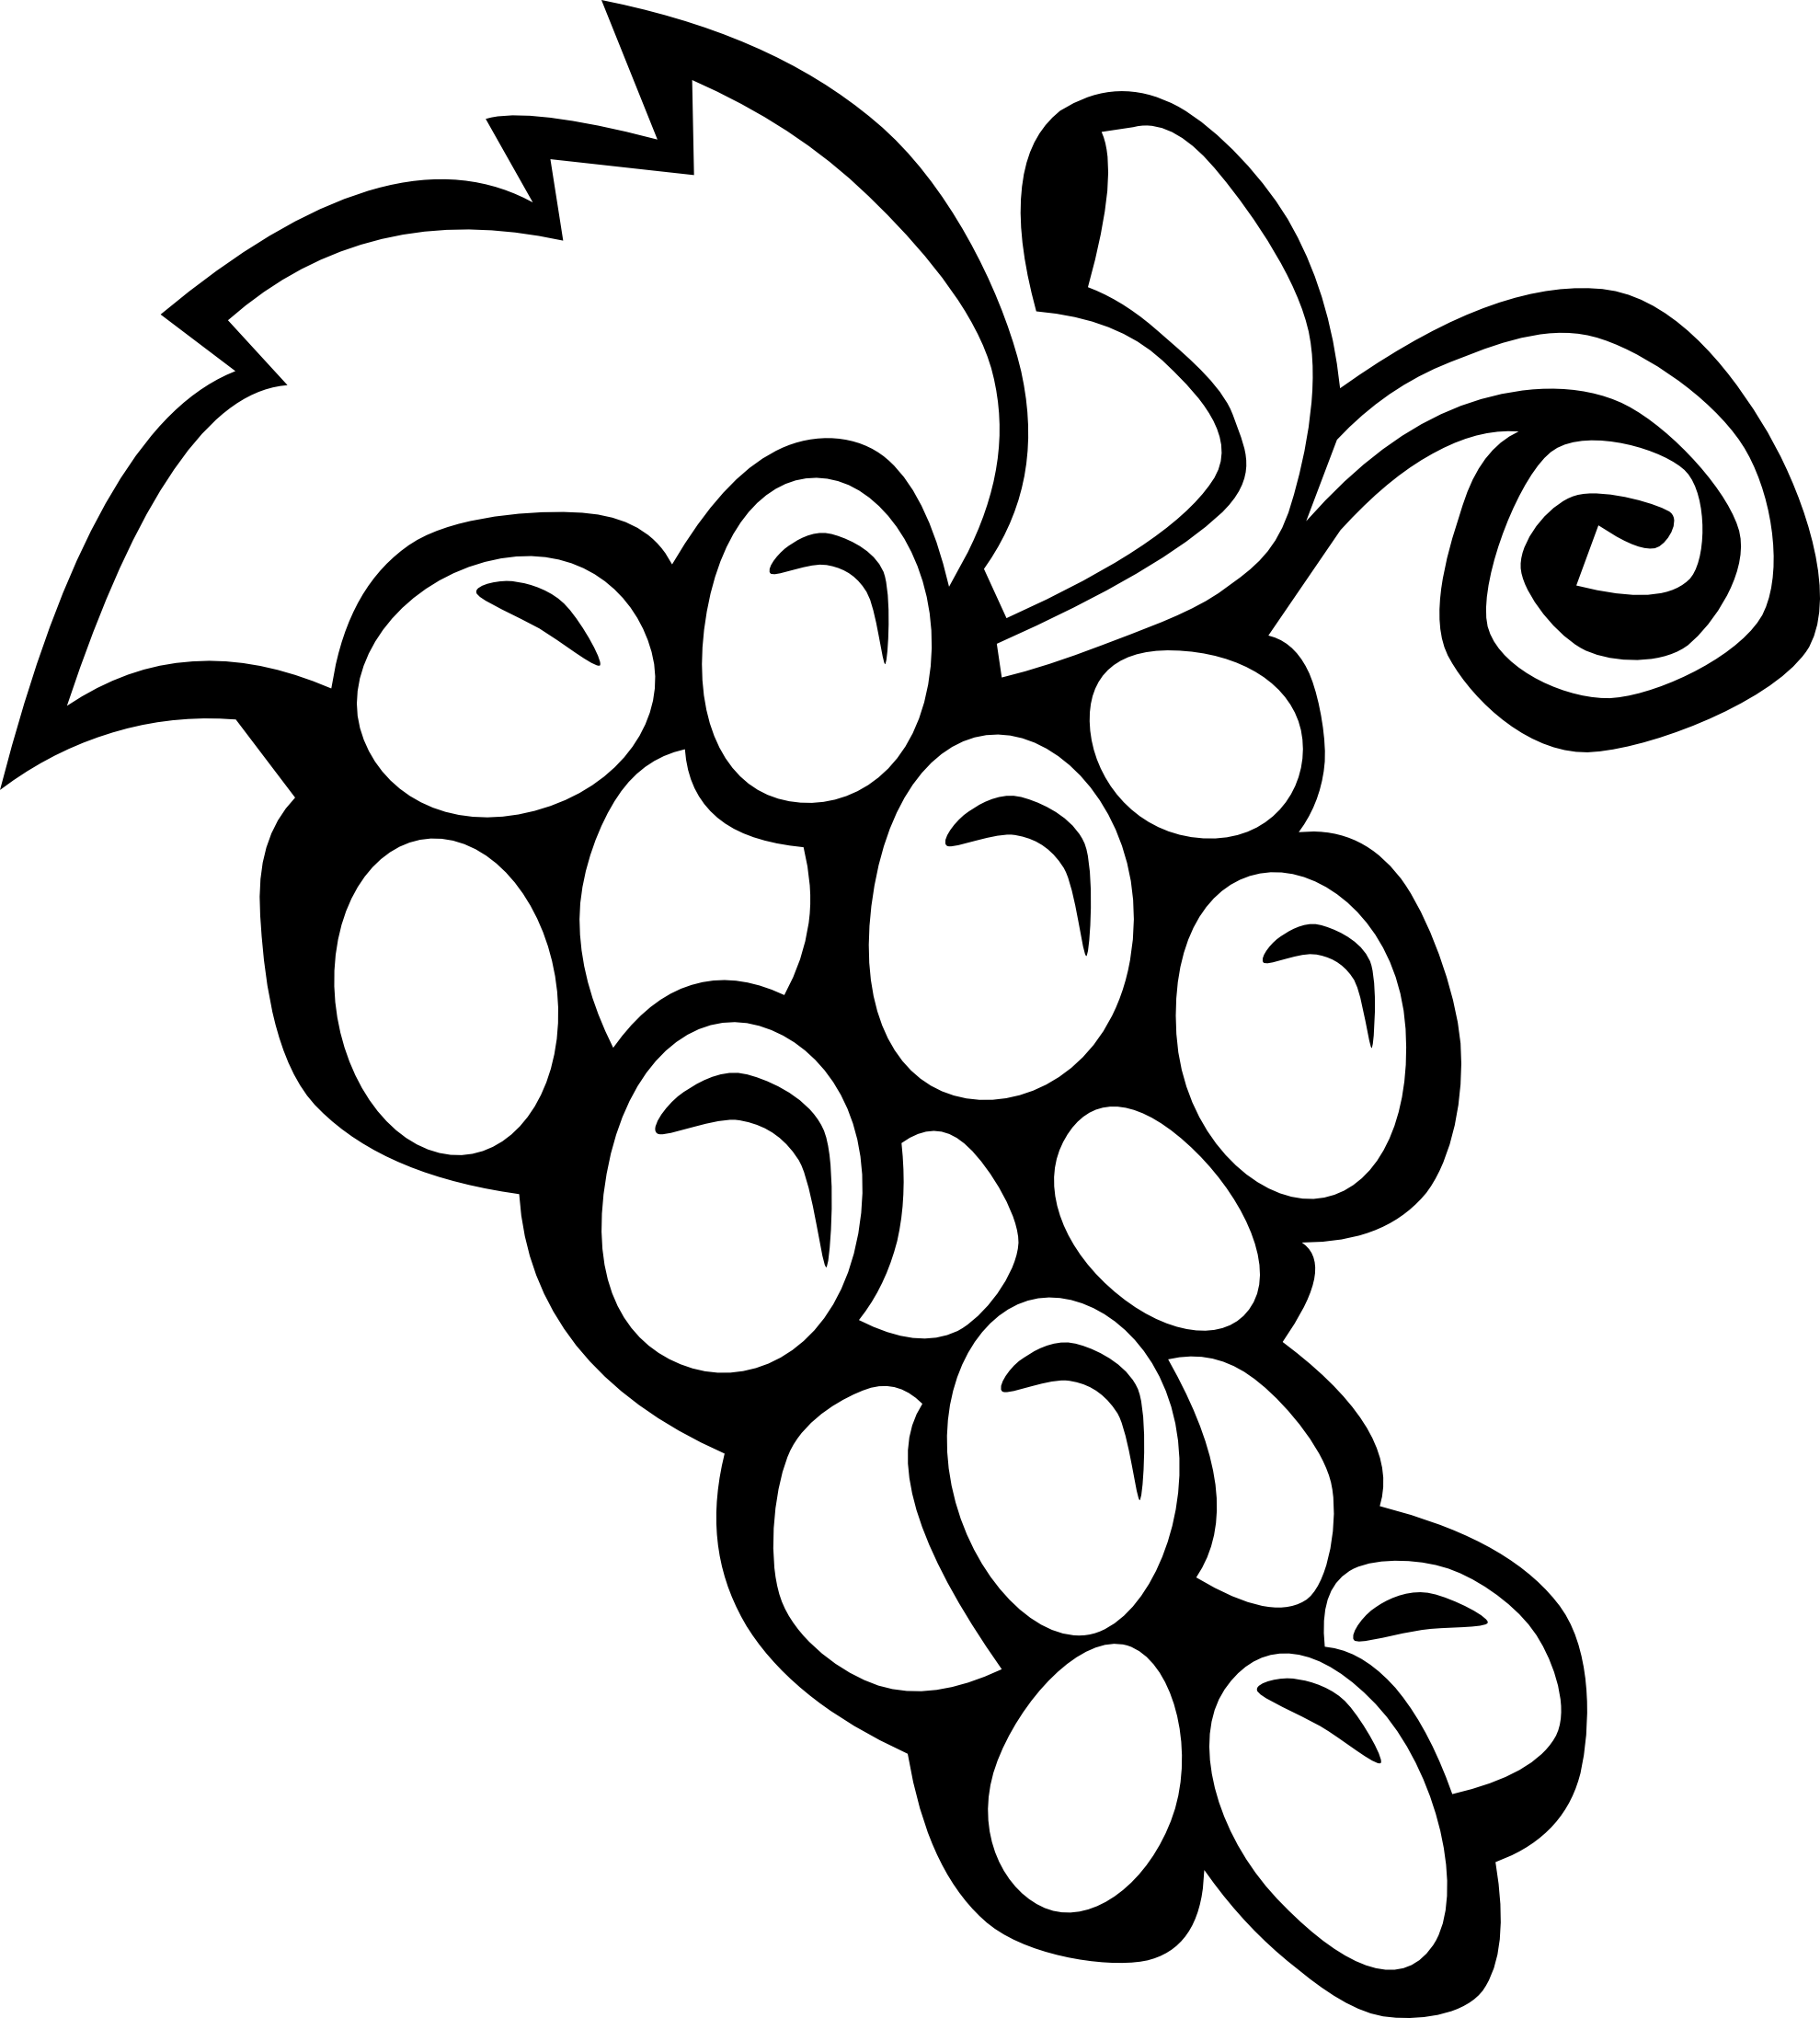 Black And White Clipart Of Fruits And Vegetables